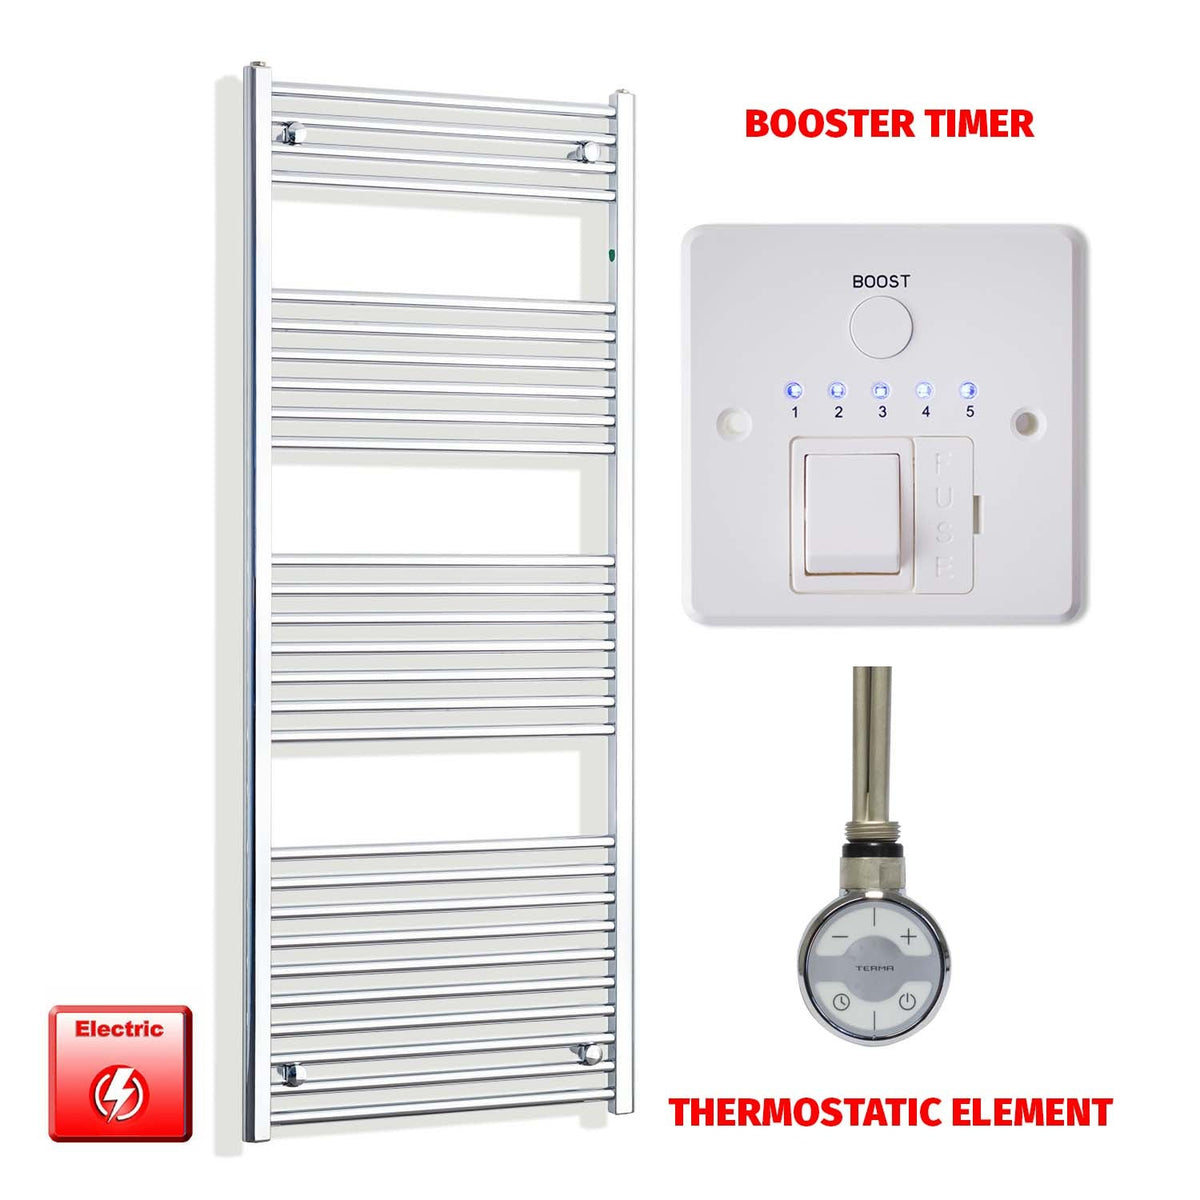 1600mm High 550mm Wide Electric Heated Towel Radiator Straight Chrome MOA Thermostatic element Booster timer